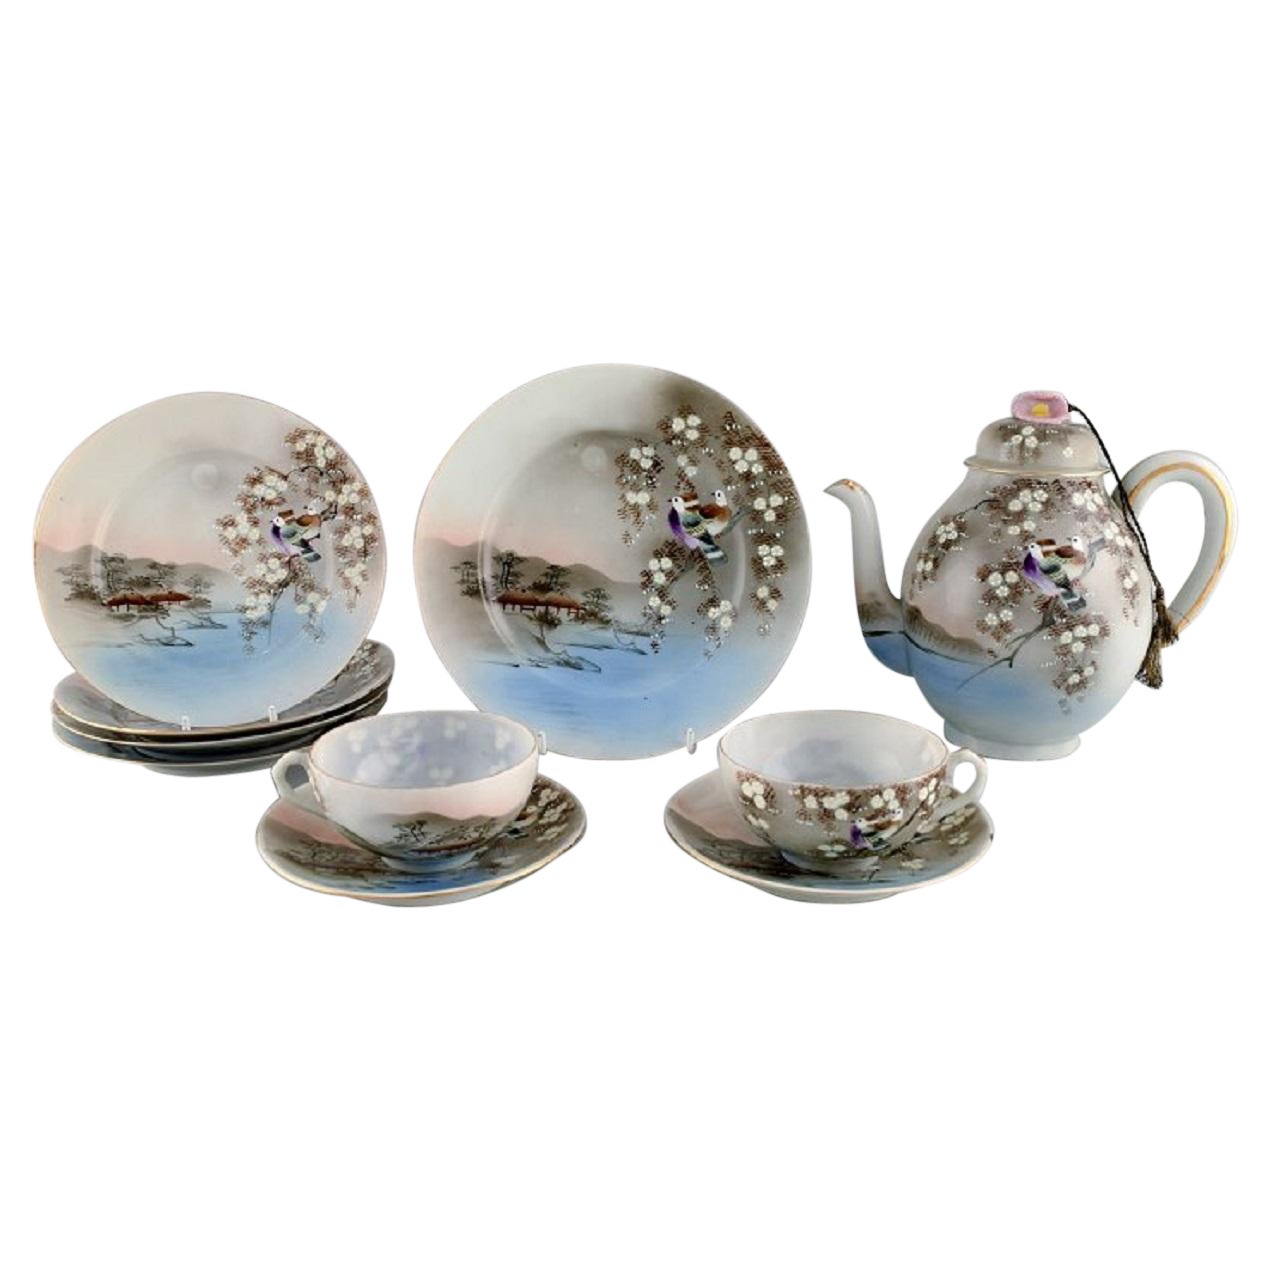 Japanese Tea Service in Hand Painted Porcelain, Mid-20th Century